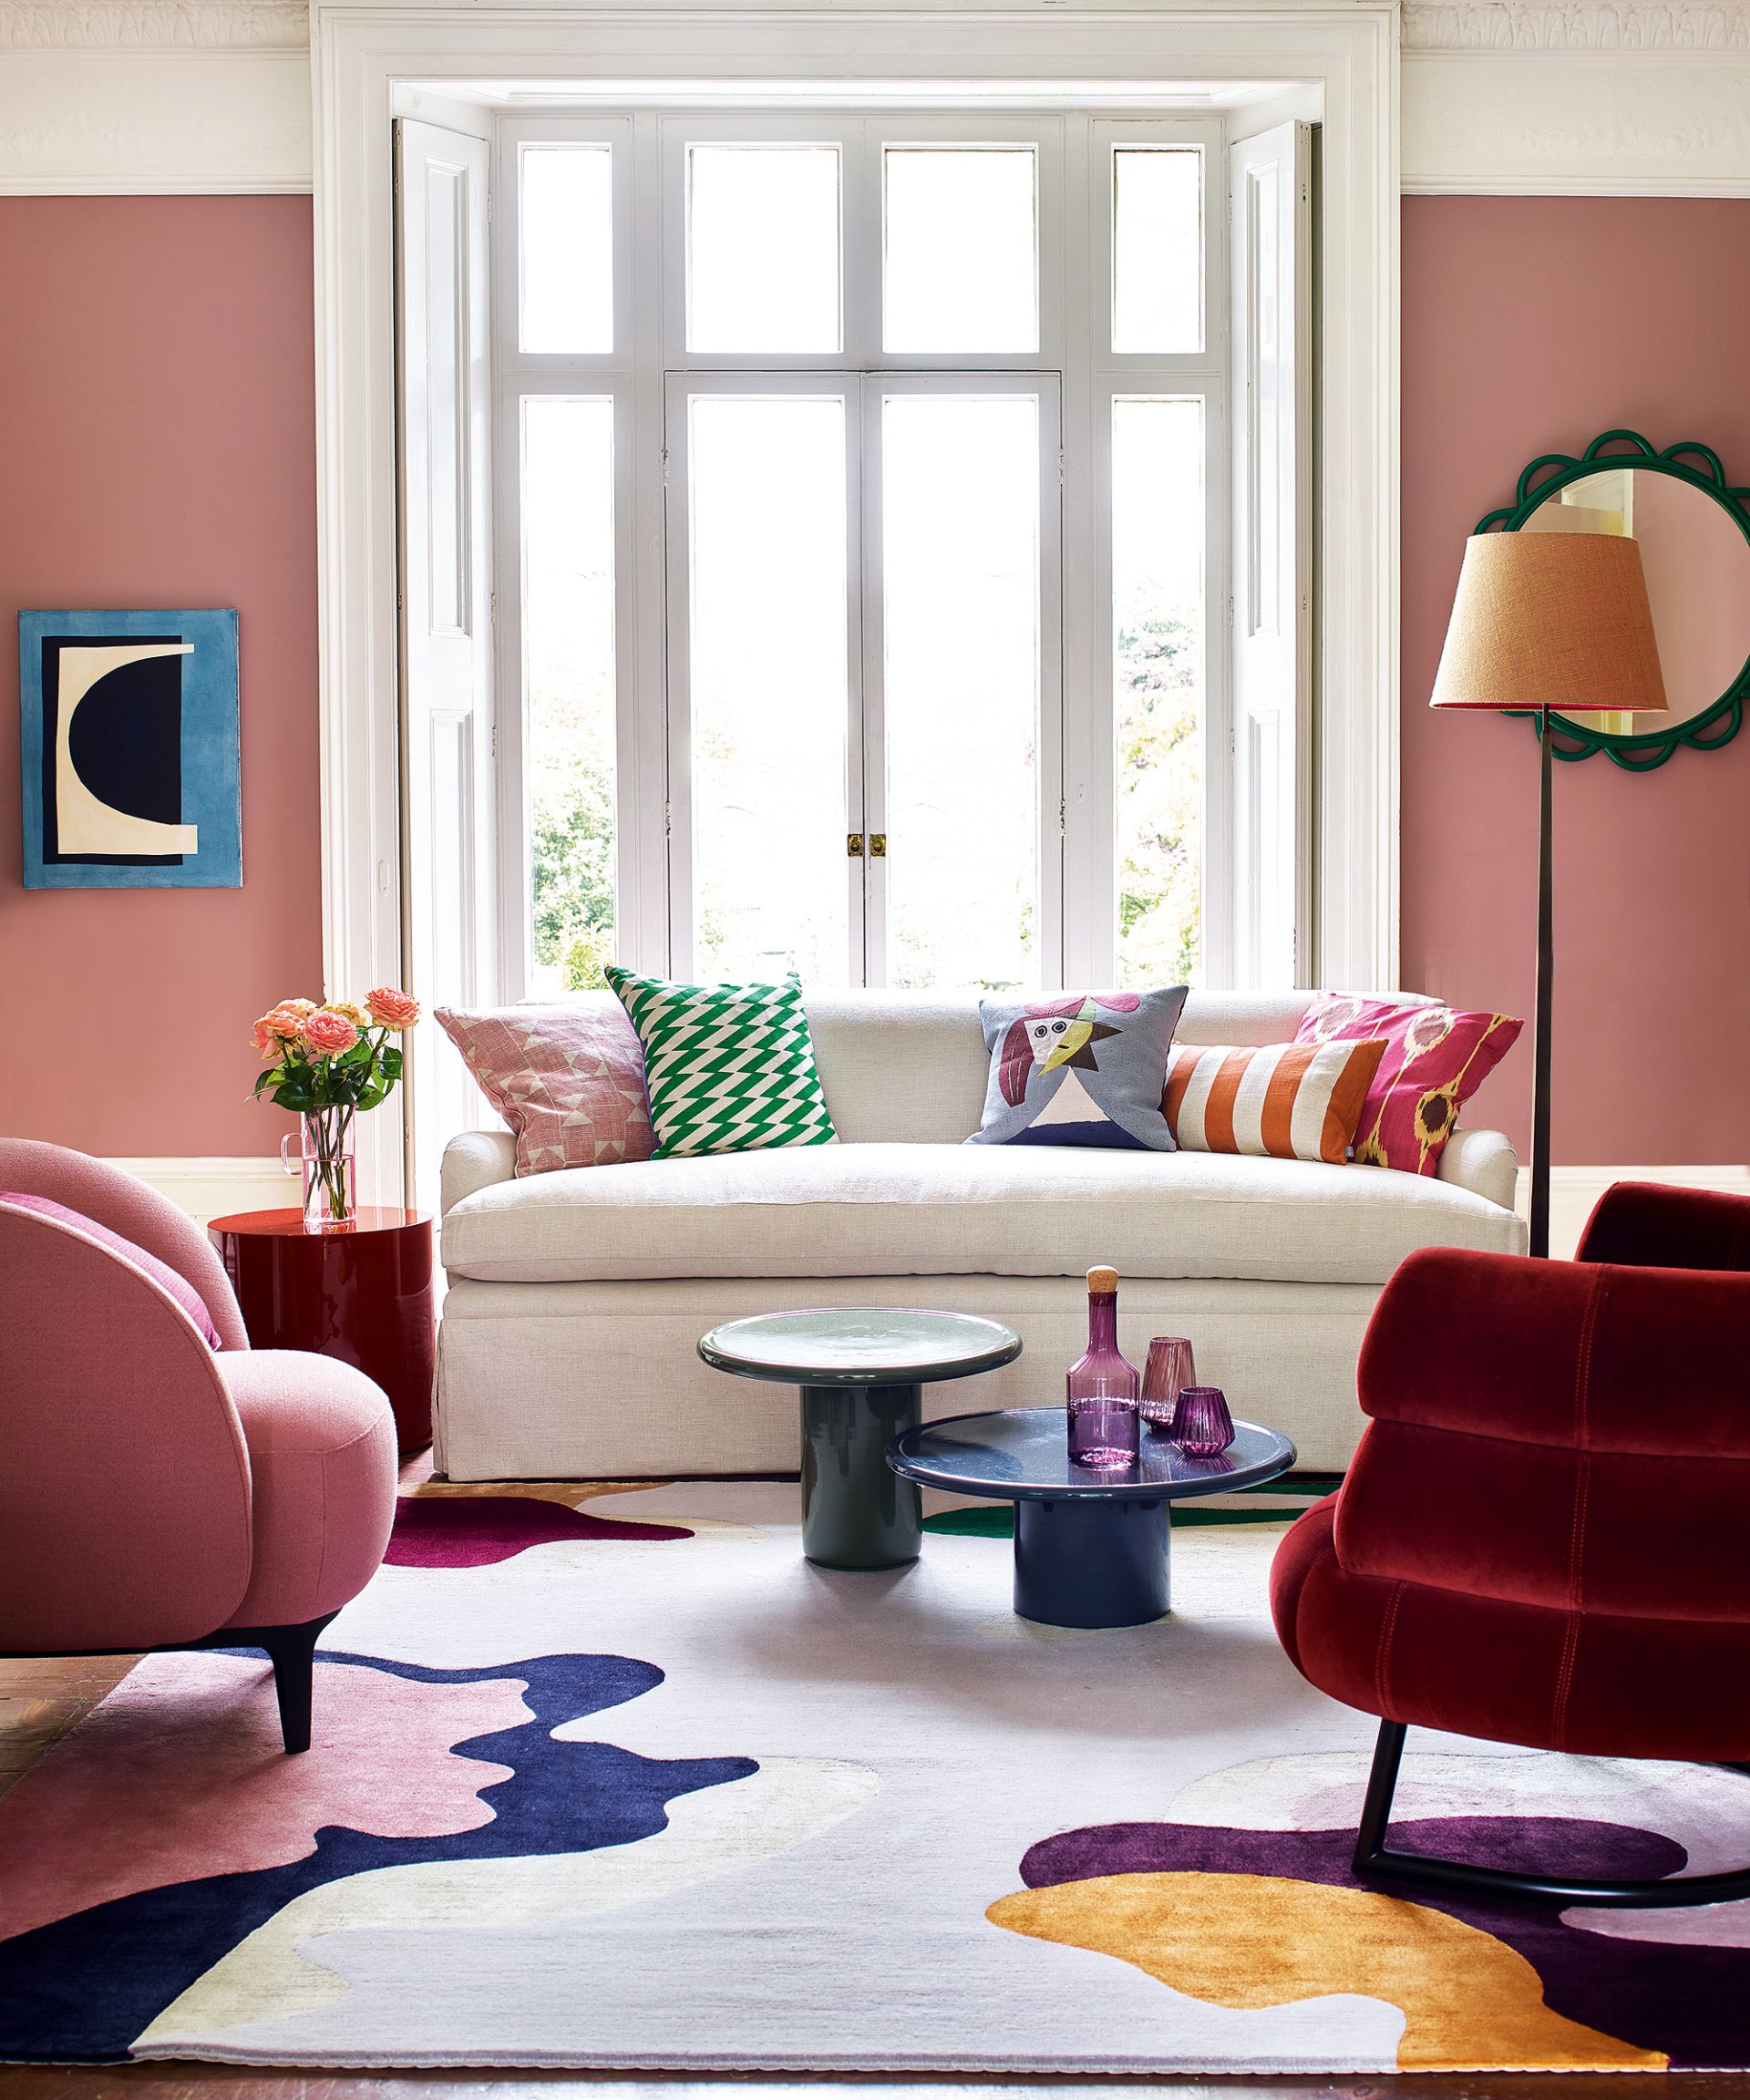 Living room rug ideas – 14 statement ways to instantly brighten up your